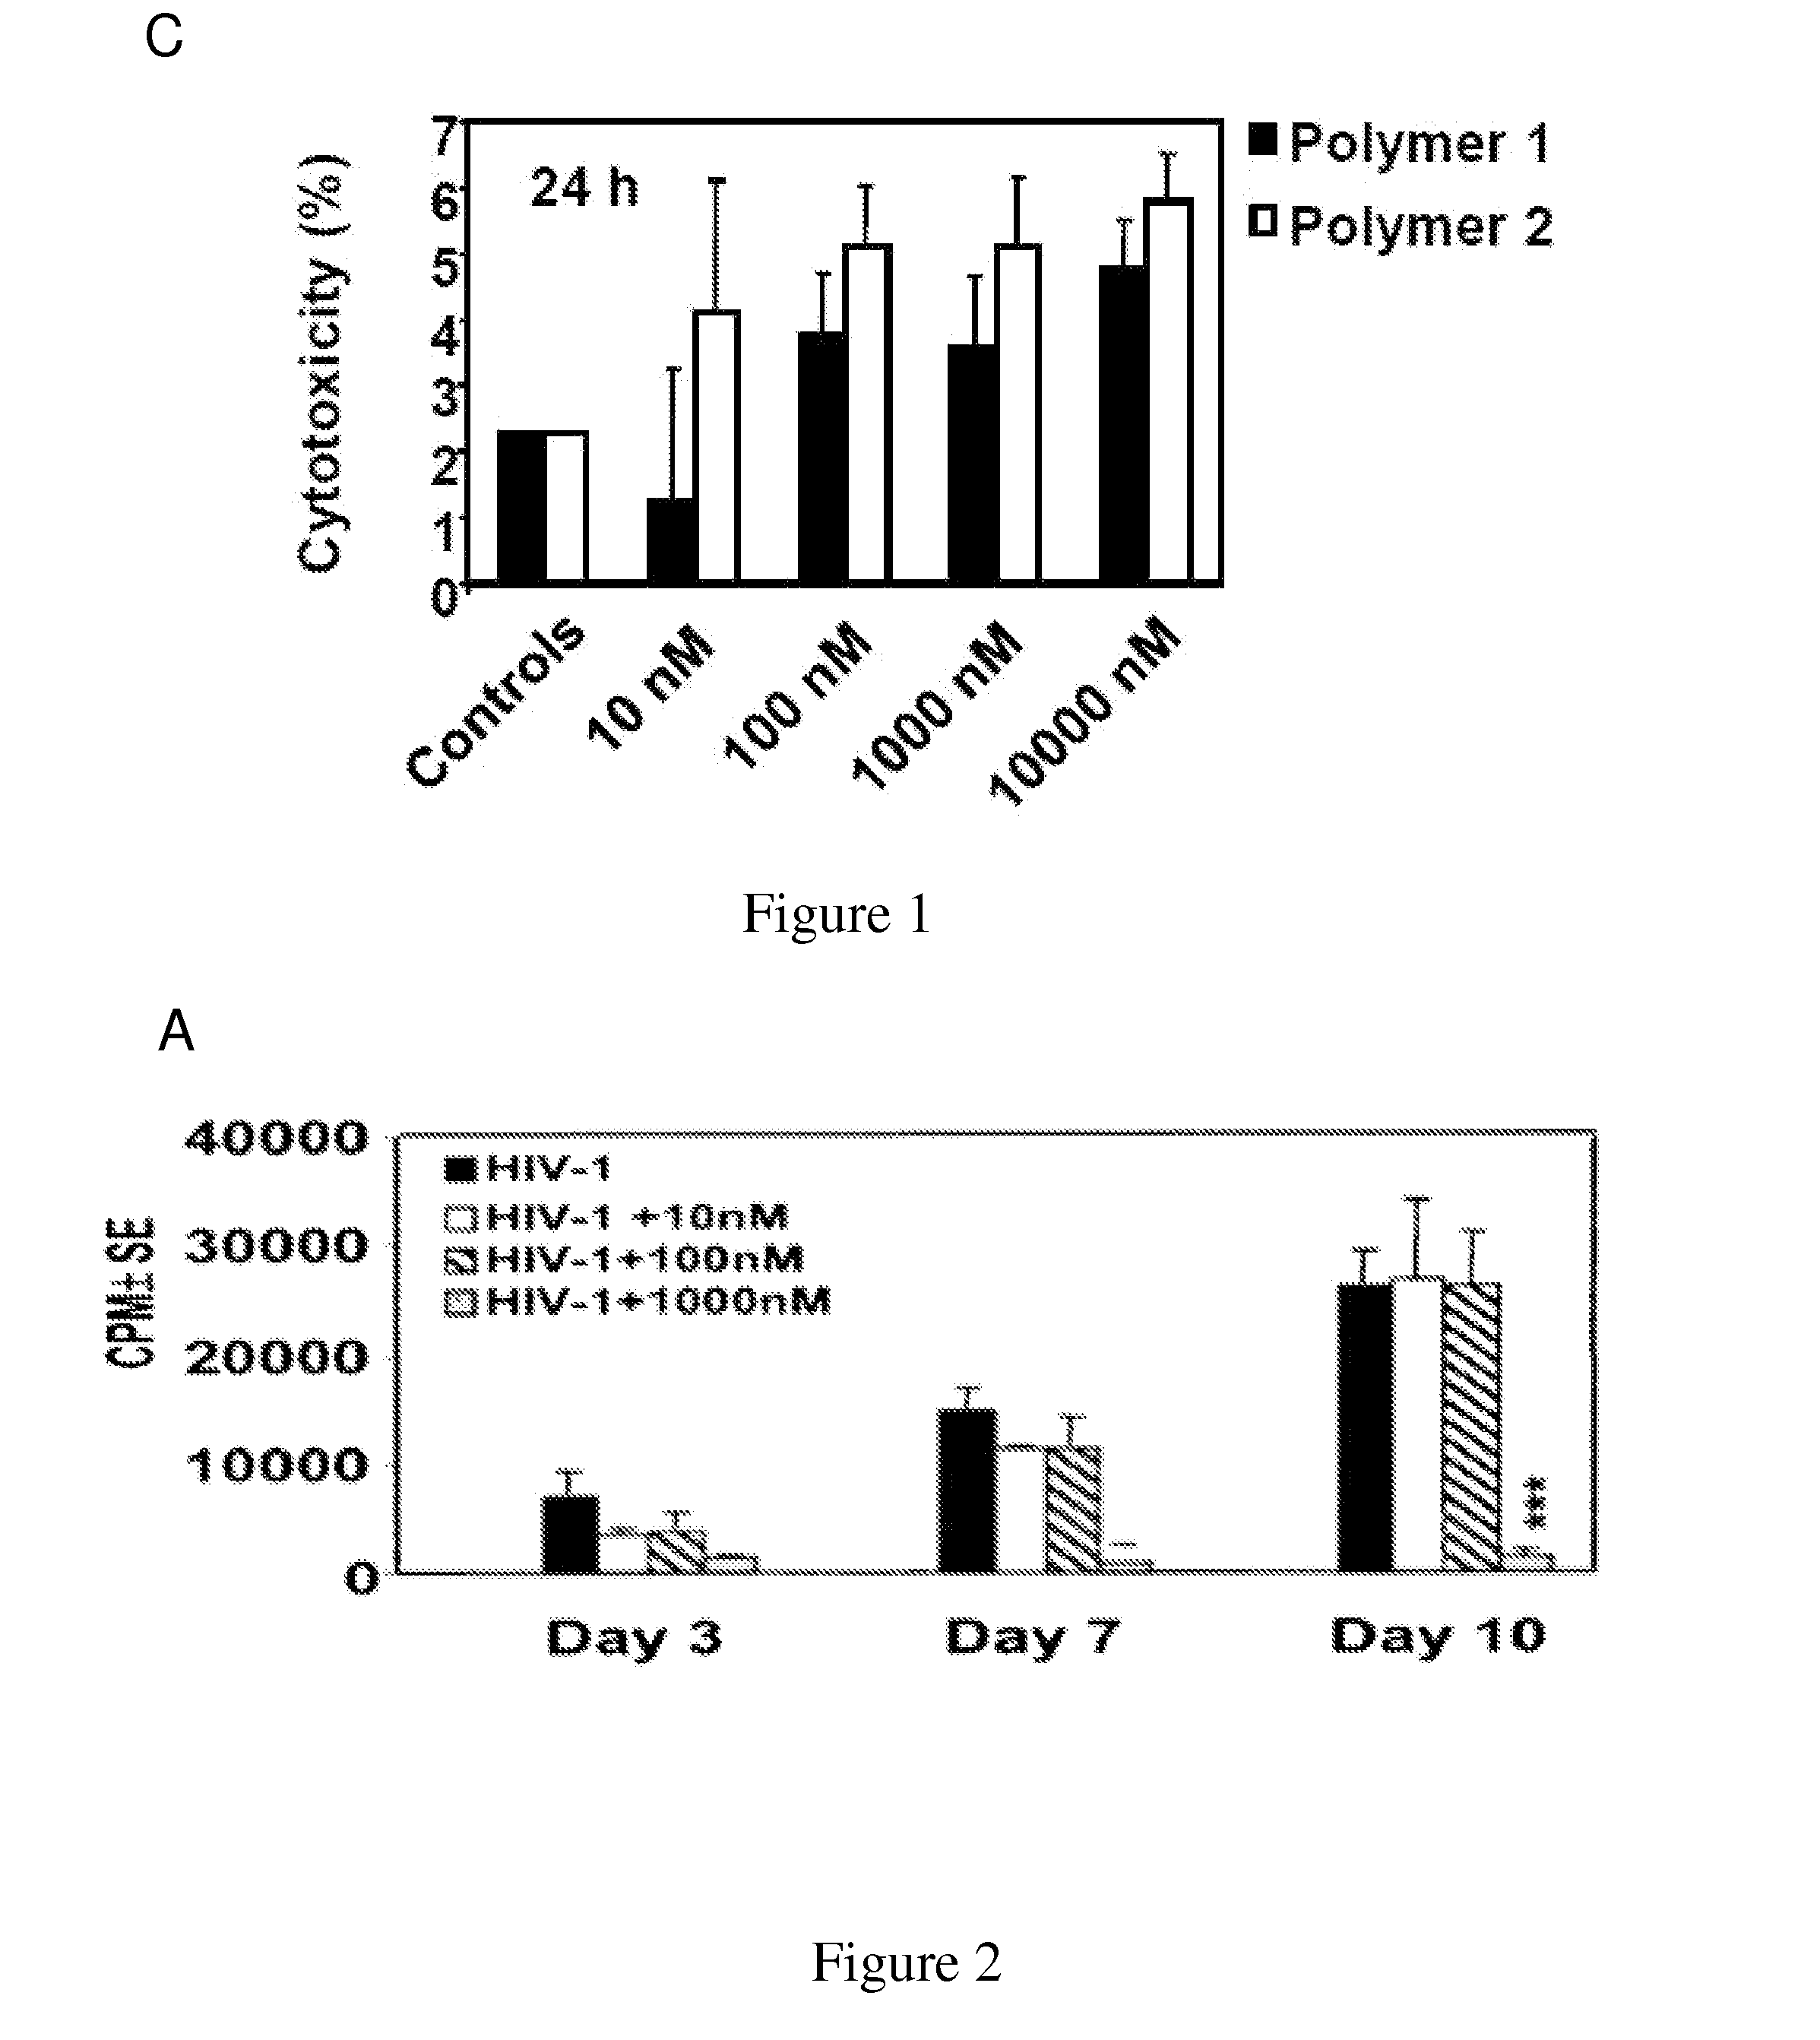 Novel self-assembling polyphenol-quinonoid polymer derivatives and uses thereof